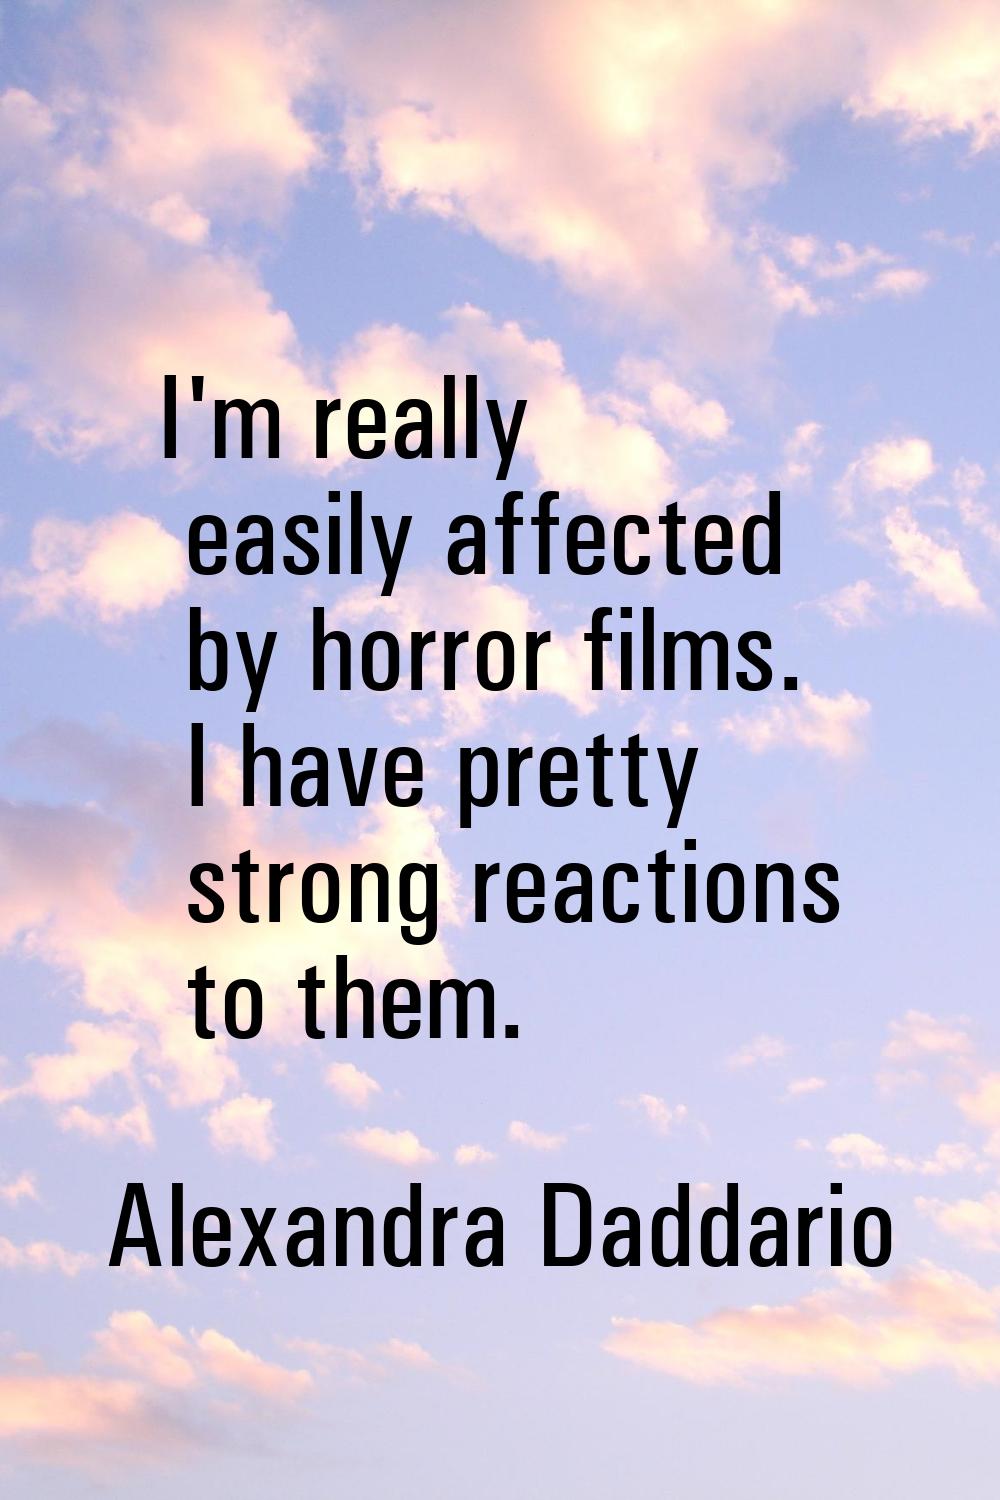 I'm really easily affected by horror films. I have pretty strong reactions to them.